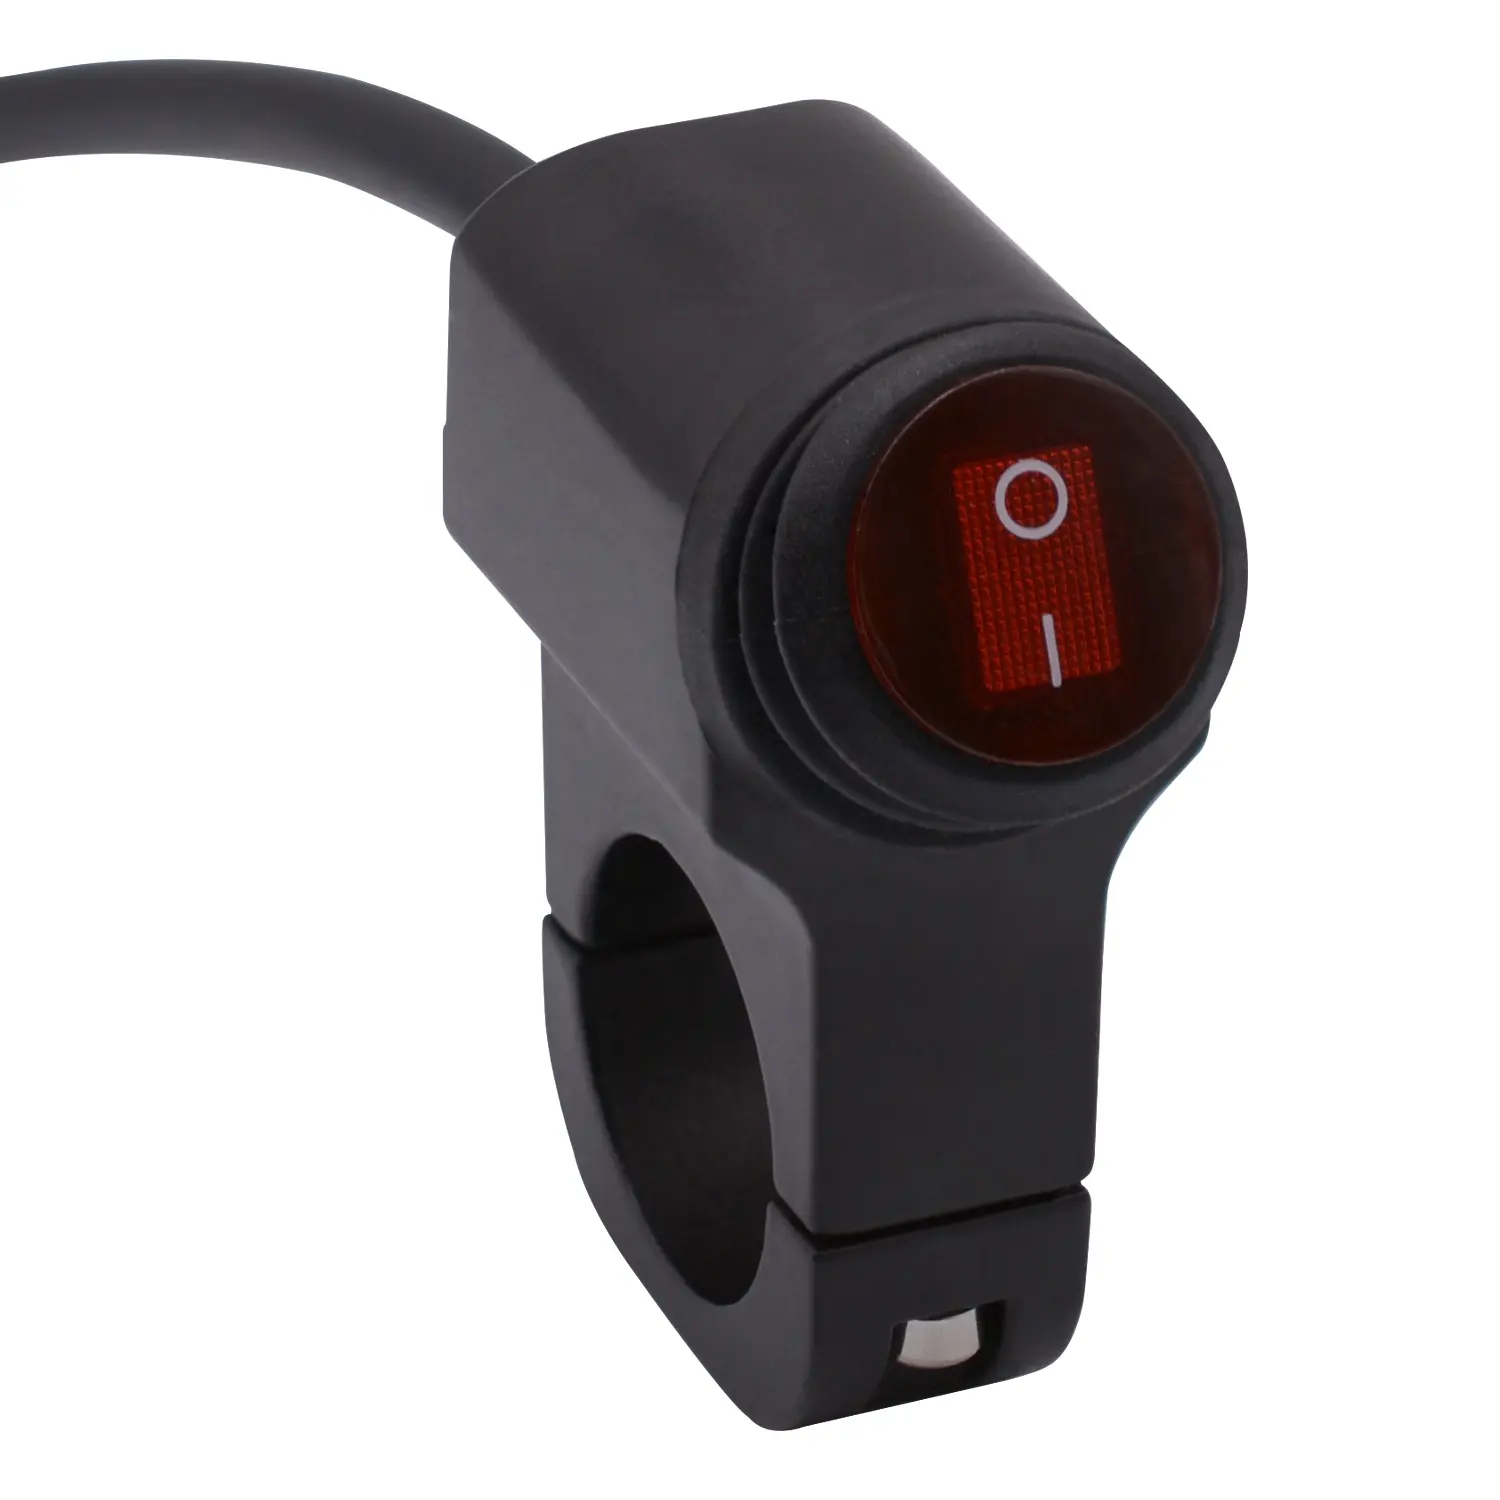 Aluminium Alloy Bibcock Waterproof Switch Black with Lamp Motorcycle Light Switch